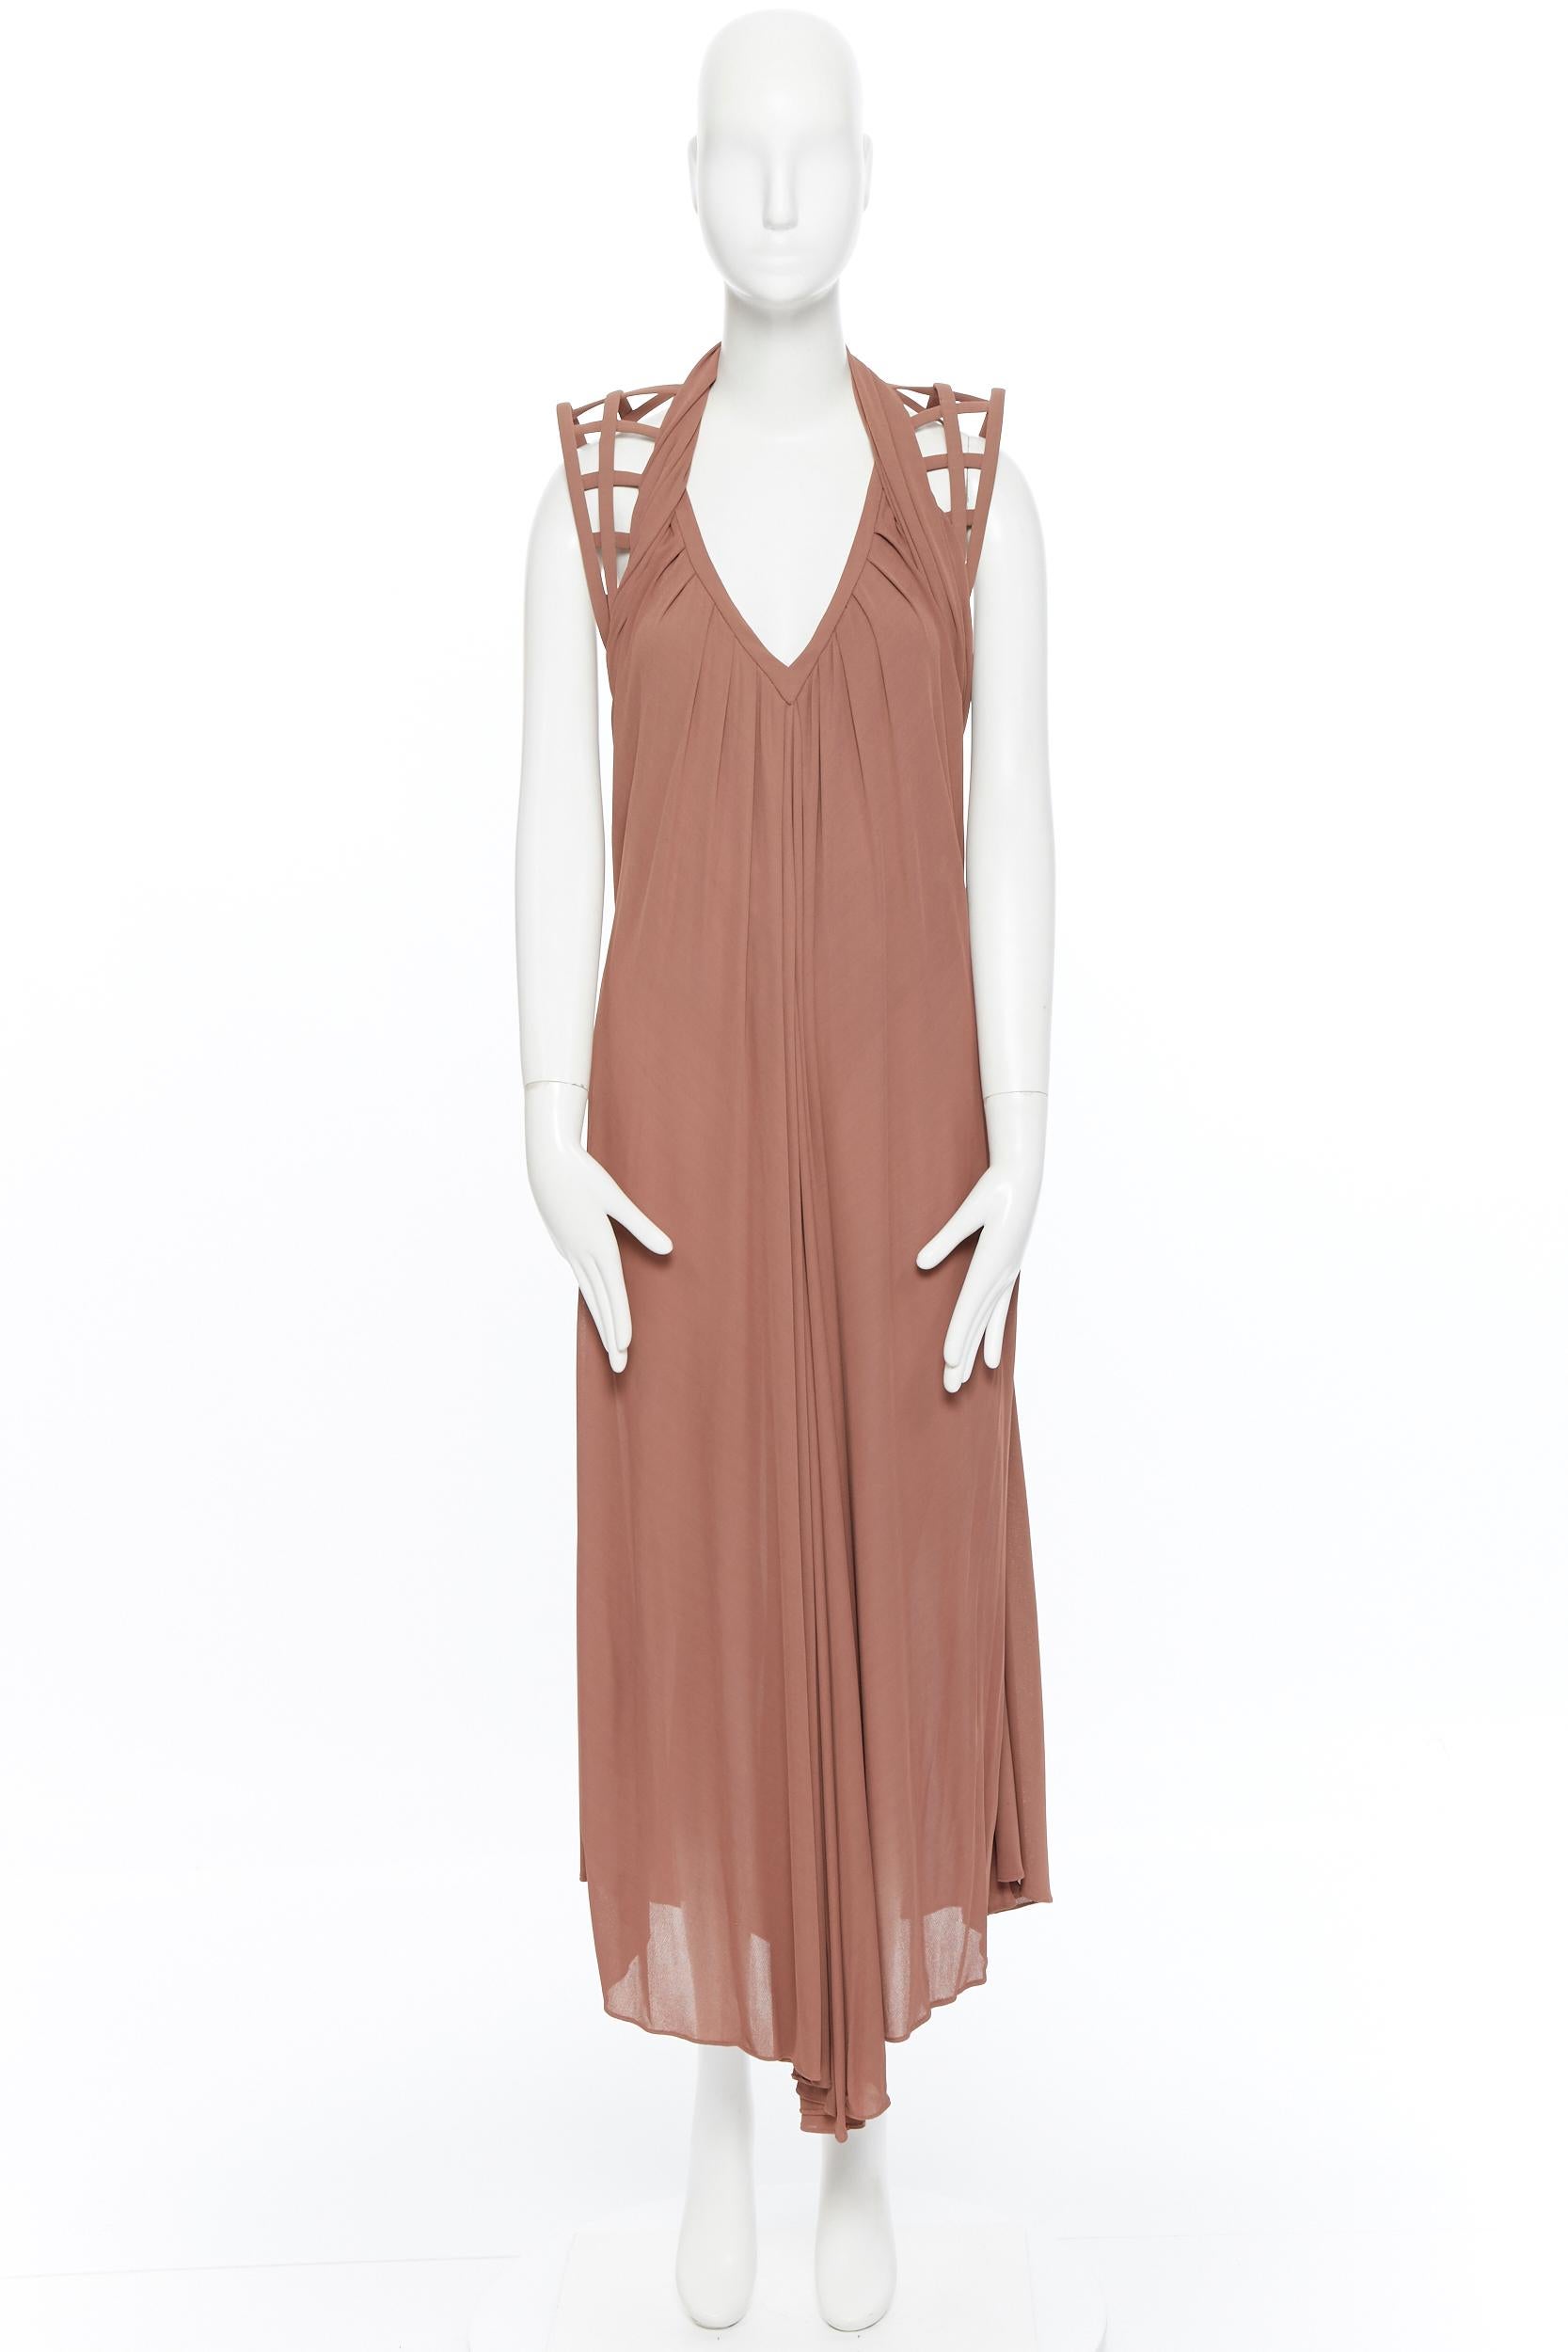 JEAN PAUL GAULTIER nude beige caged structured shoulder draped midi dress
Brand: Jean Paul Gaultier
Designer: Jean Paul Gaultier
Model Name / Style: Caged shoulder dress
Material: Composition label removed
Color: Beige
Pattern: Solid
Extra Detail: